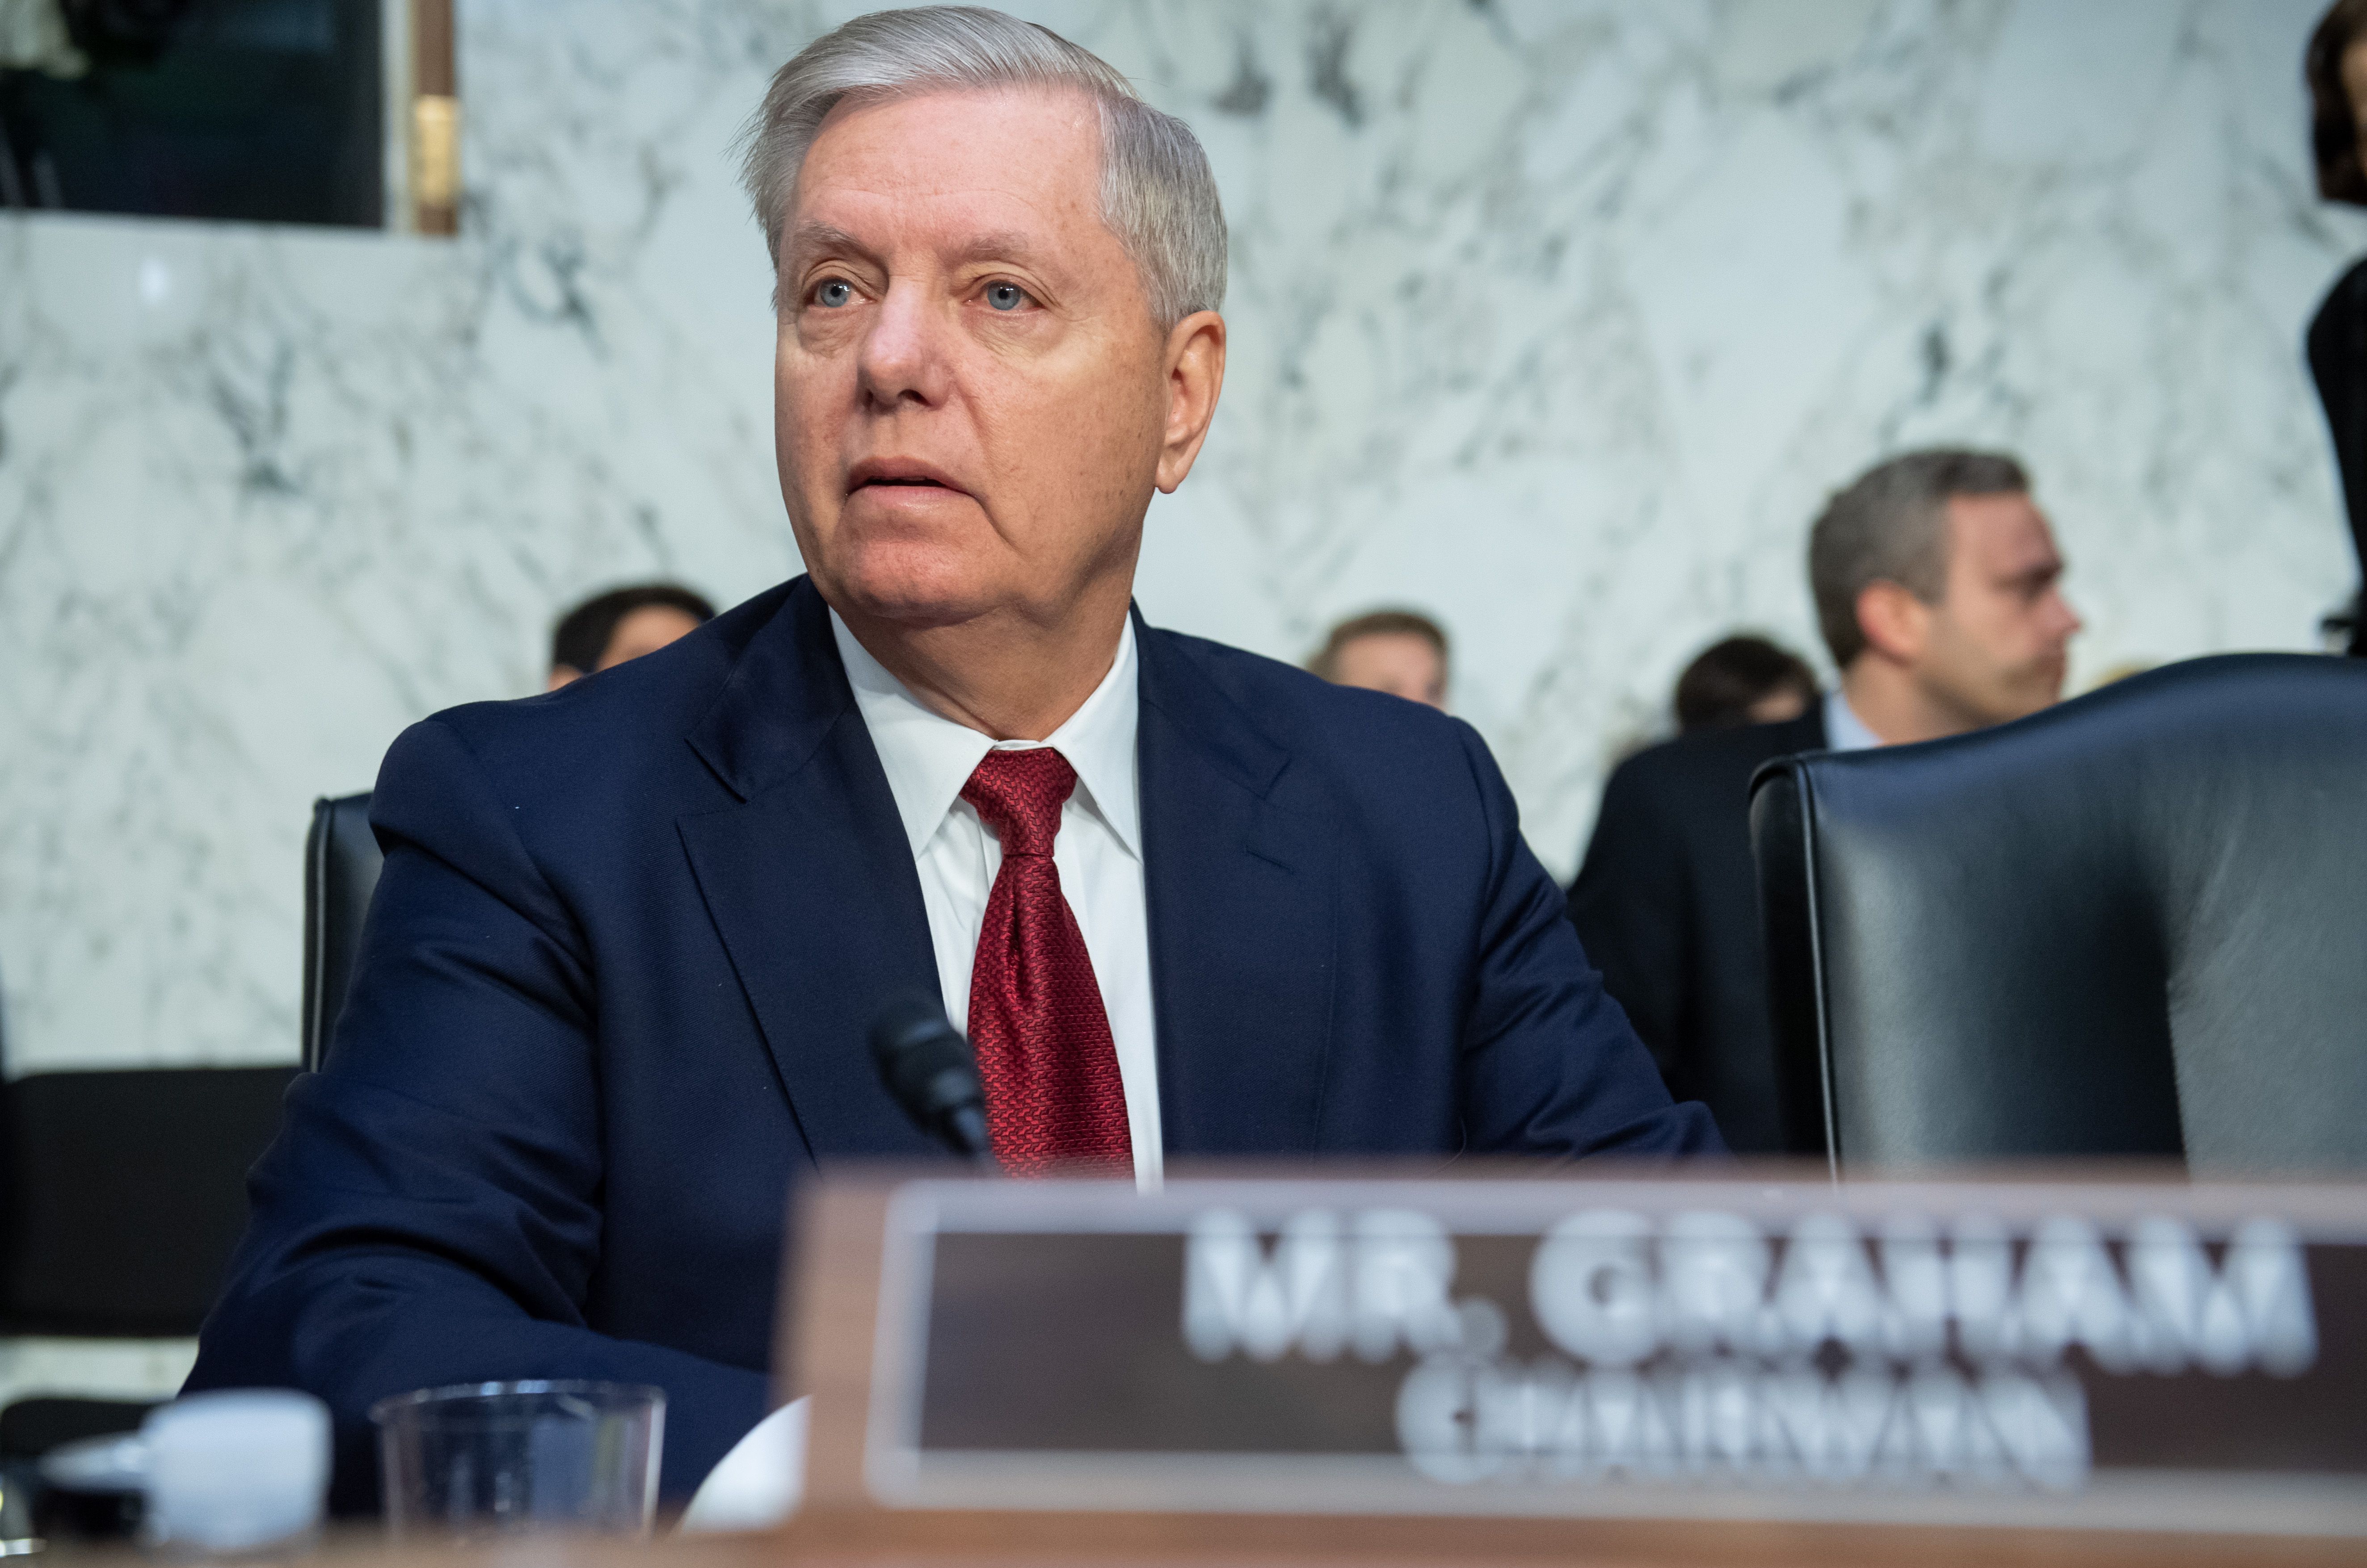 Senate Judiciary Committee Chairman Lindsey Graham (R-SC) arrives for hearing on Capitol Hill in December 2019. (Saul Loeb/AFP/Getty Images)